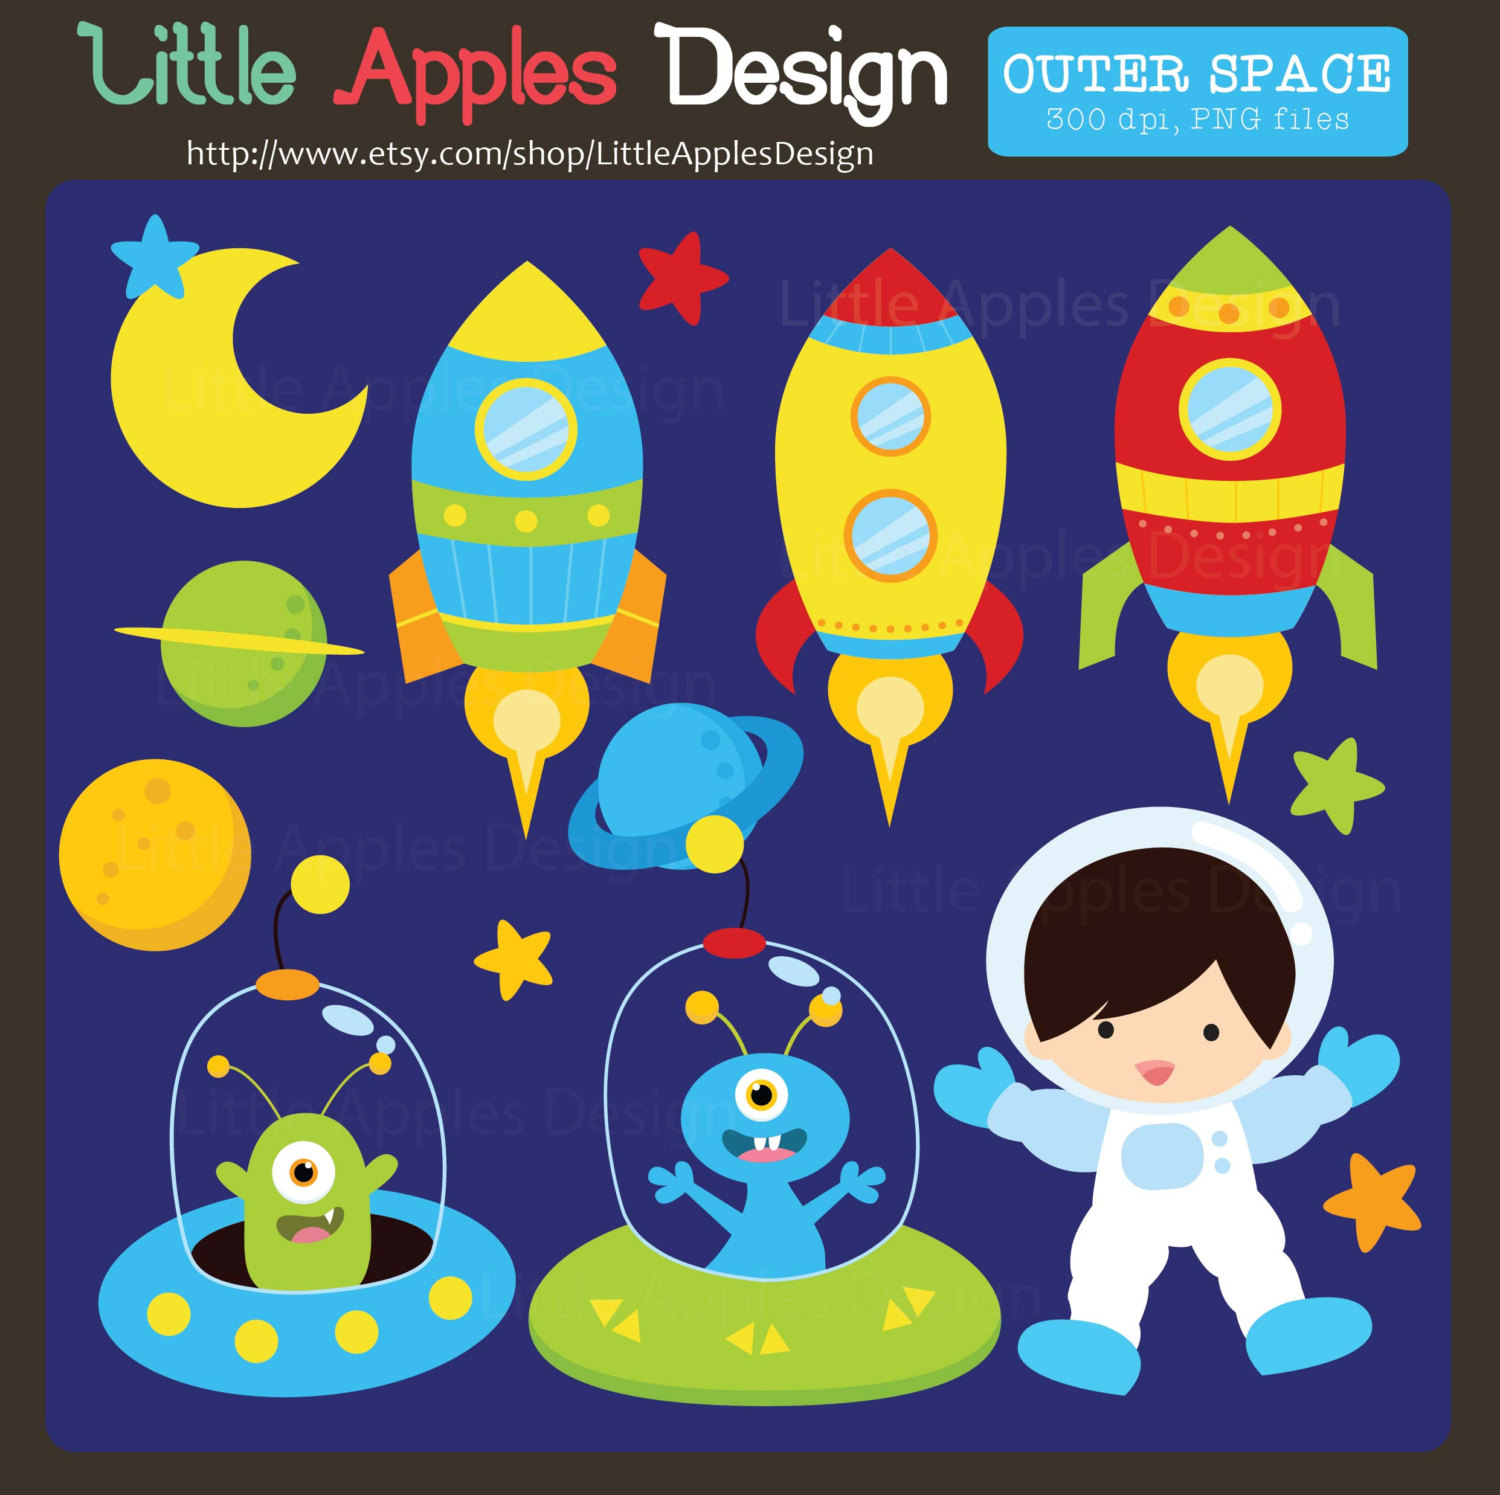 Outer Space Clip Art by Three